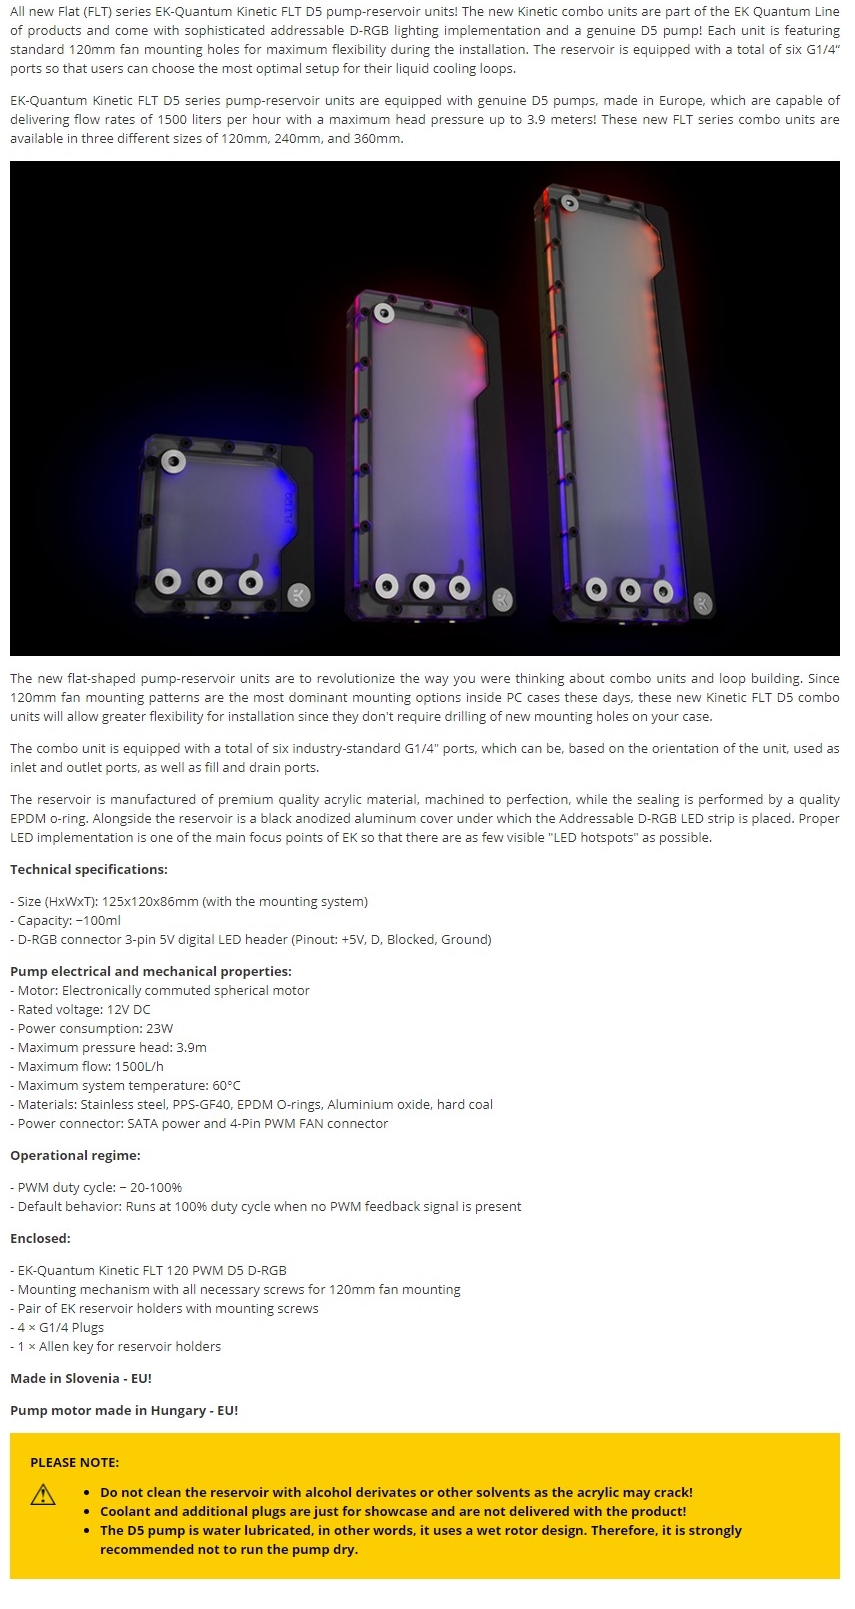 A large marketing image providing additional information about the product EK Quantum Kinetic FLT 120 D5 PWM D-RGB - Additional alt info not provided